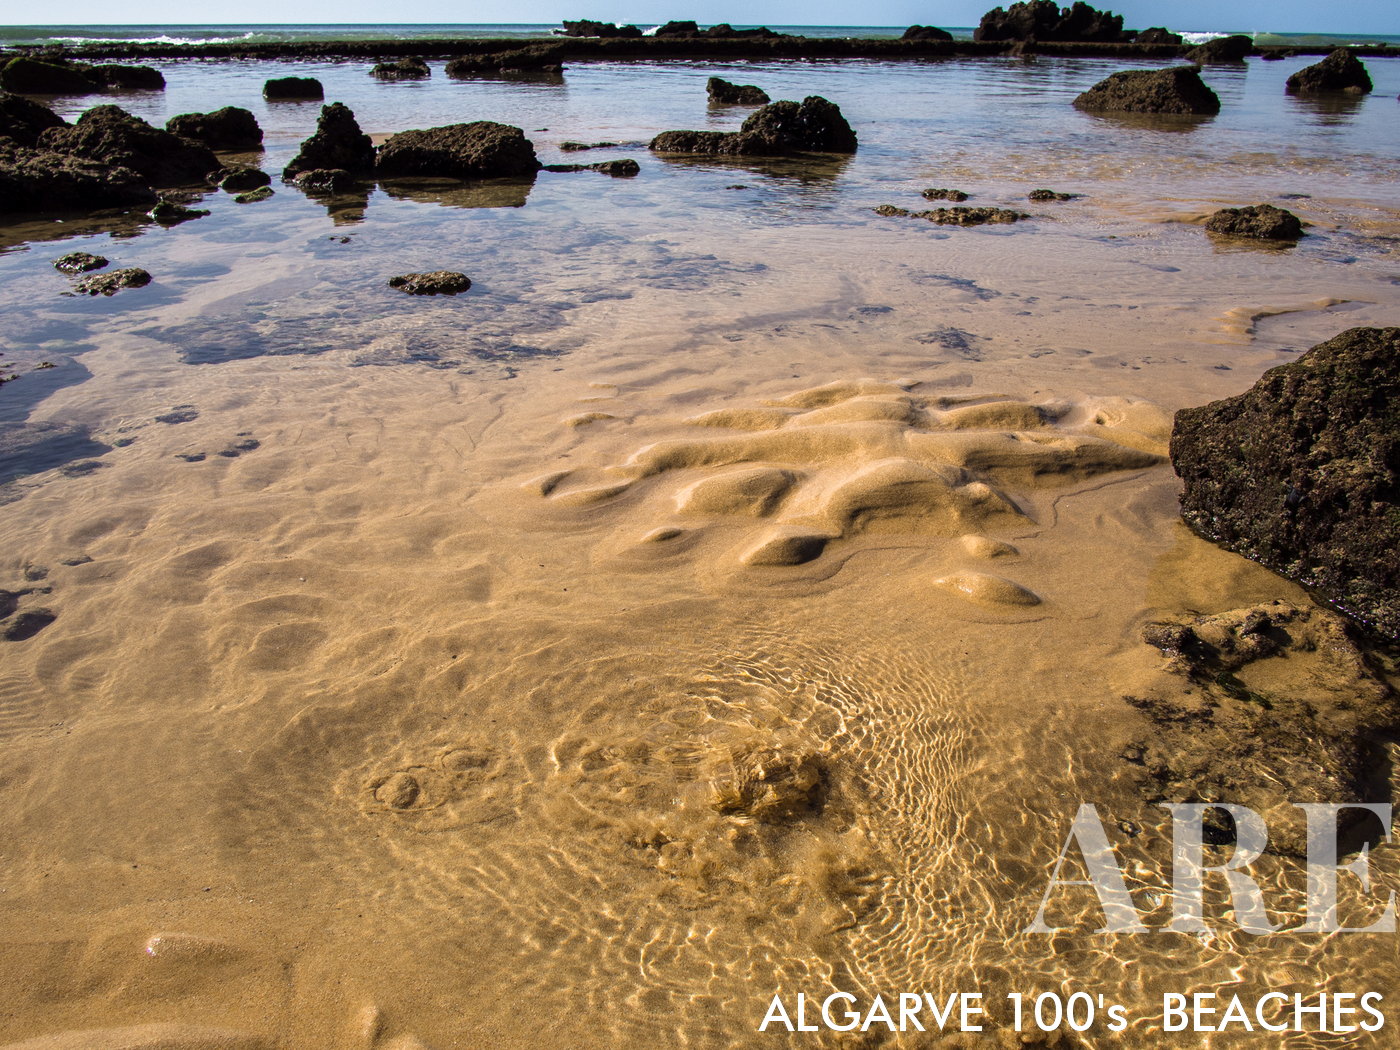 Visitors to Olhos de Água can explore these natural wonders, often forming their own pools within the sand, making it an intriguing location for both children and adults. This distinctive mix of freshwater and sea environments contributes to the diverse ecosystem of the area, offering a unique beach-going experience like no other.